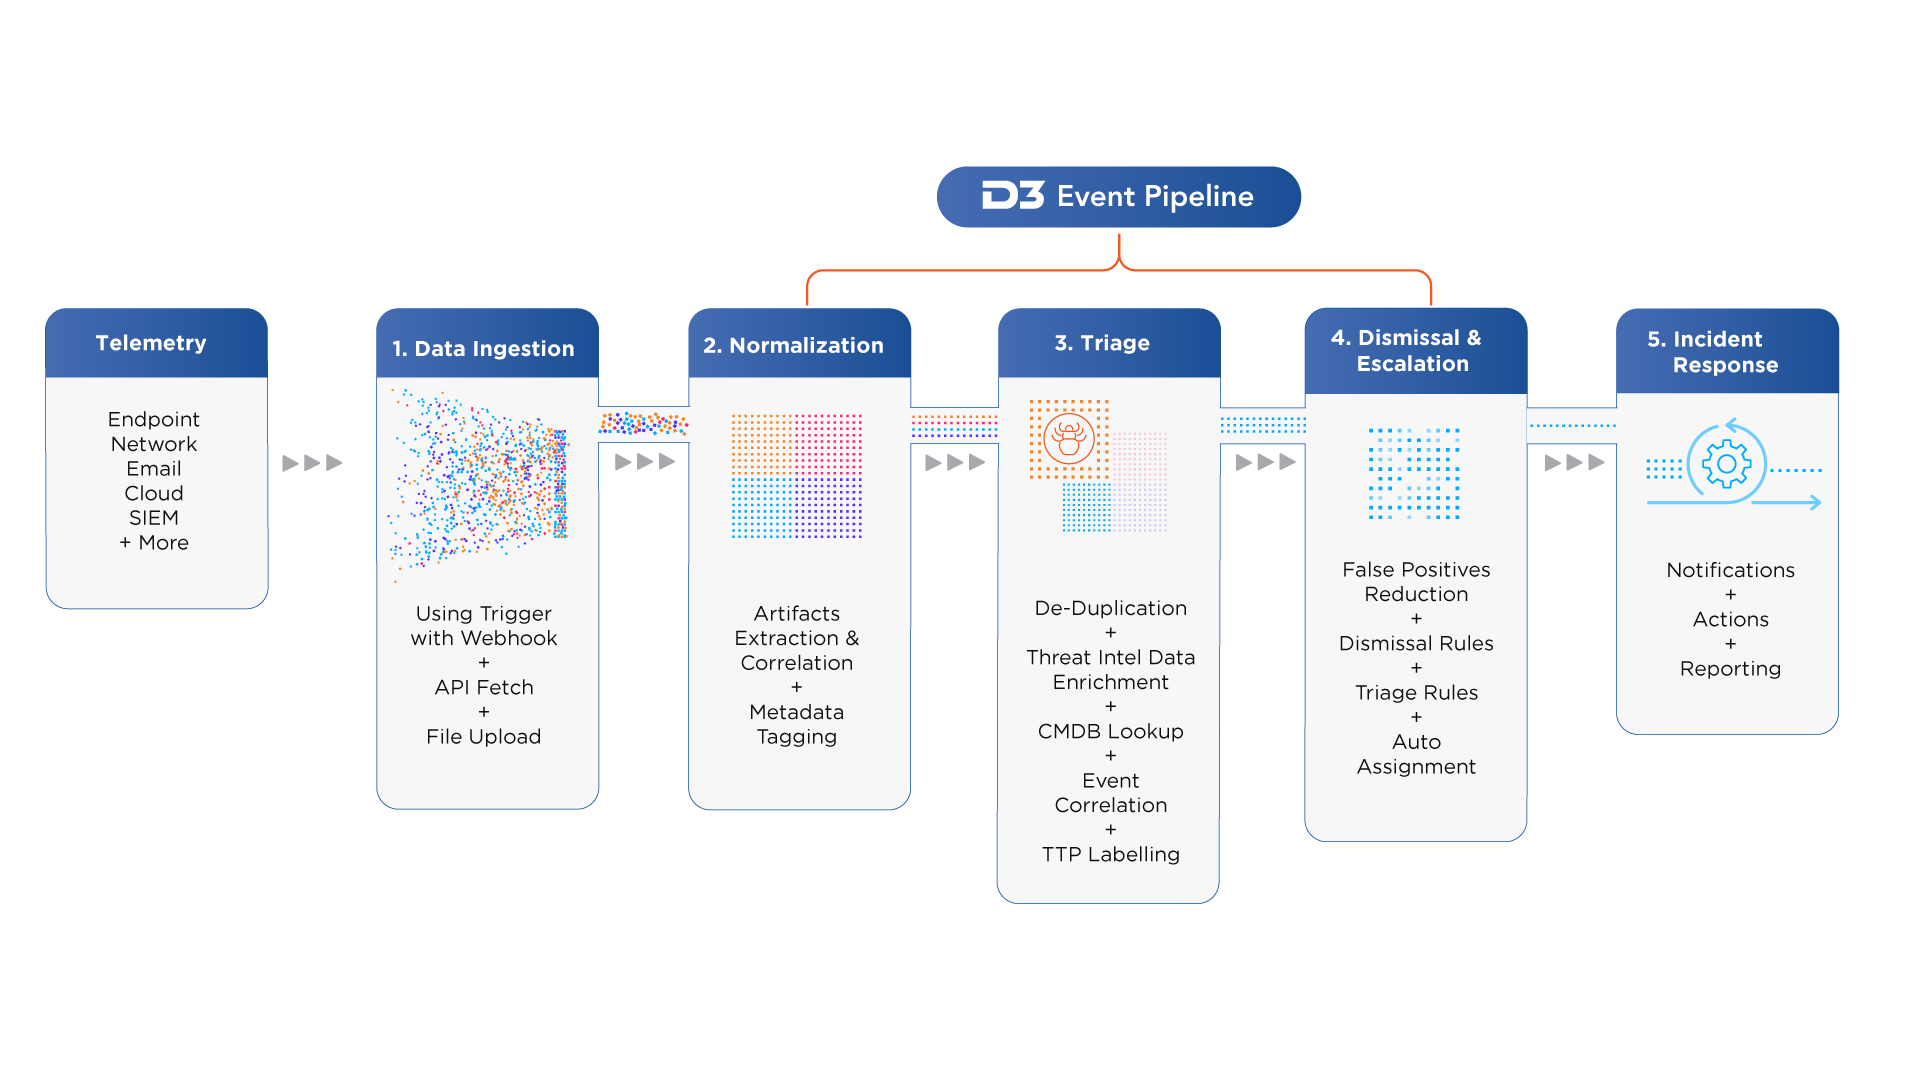 D3's Event Pipeline is a next-generation SOAR engine that enables triage, investigation, and response for every alert.